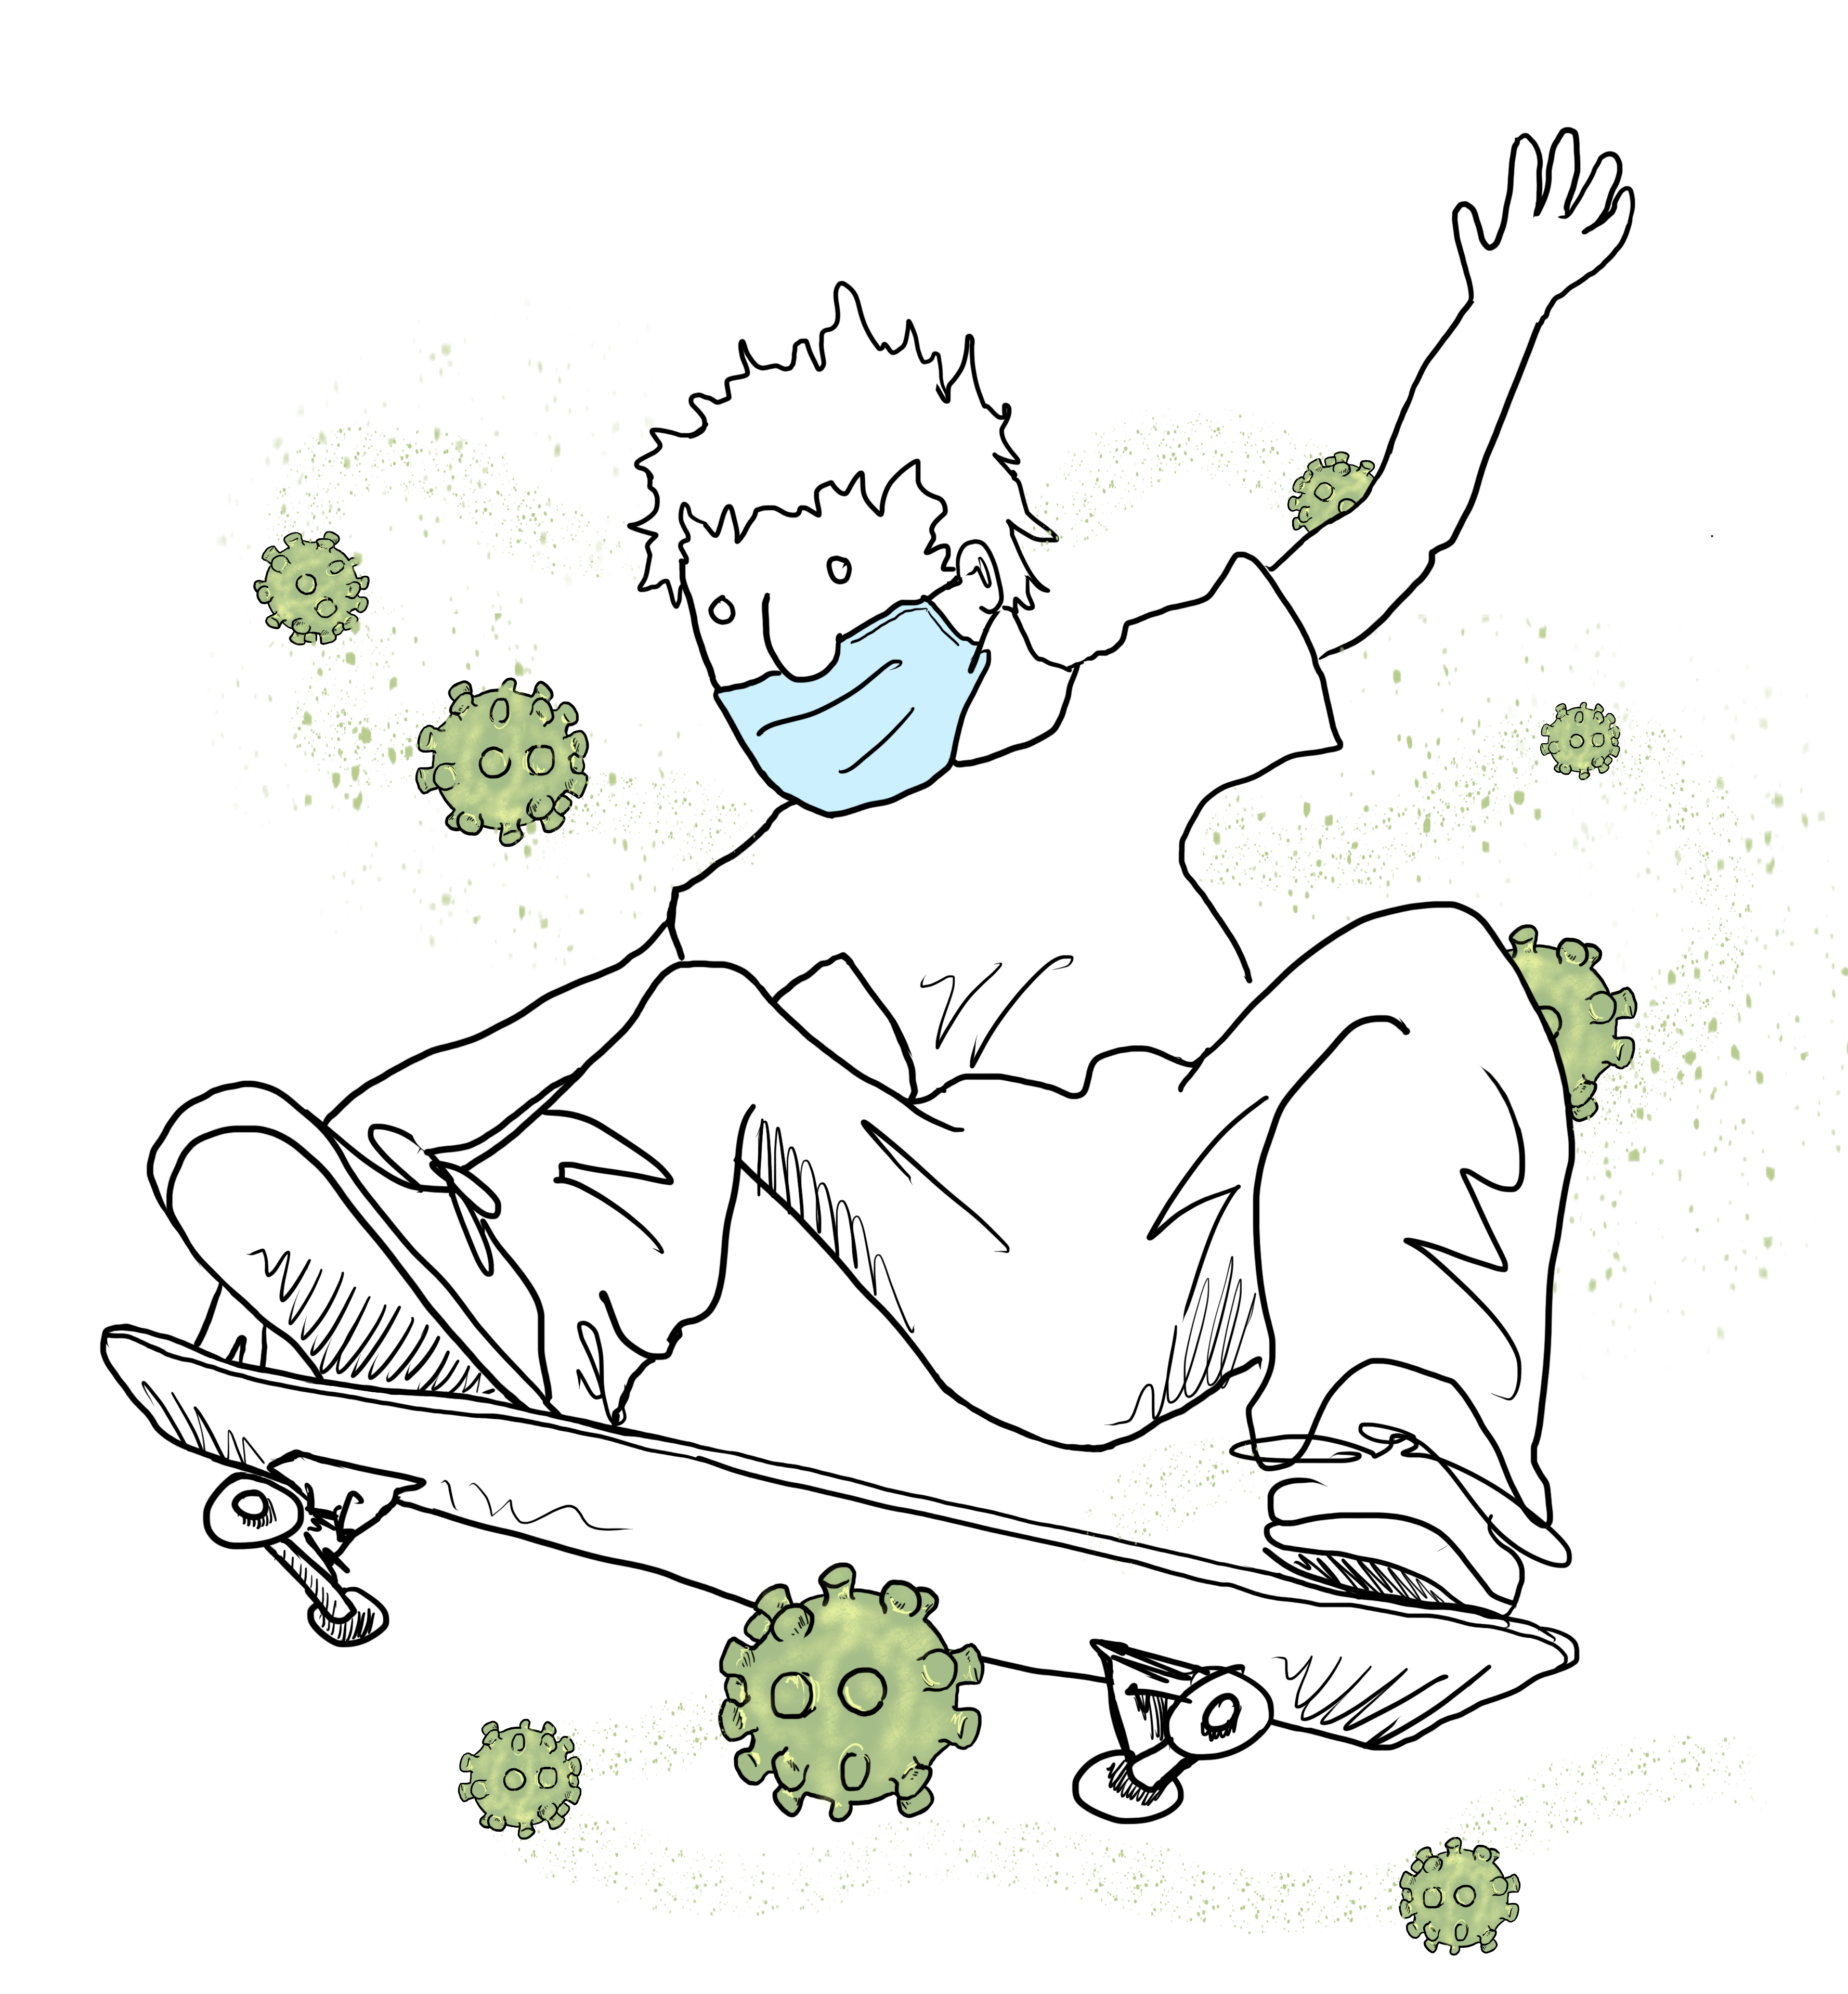 illustration of a male skateboarder flying through green virus molecules on his skateboard (while wearing a mask of course).